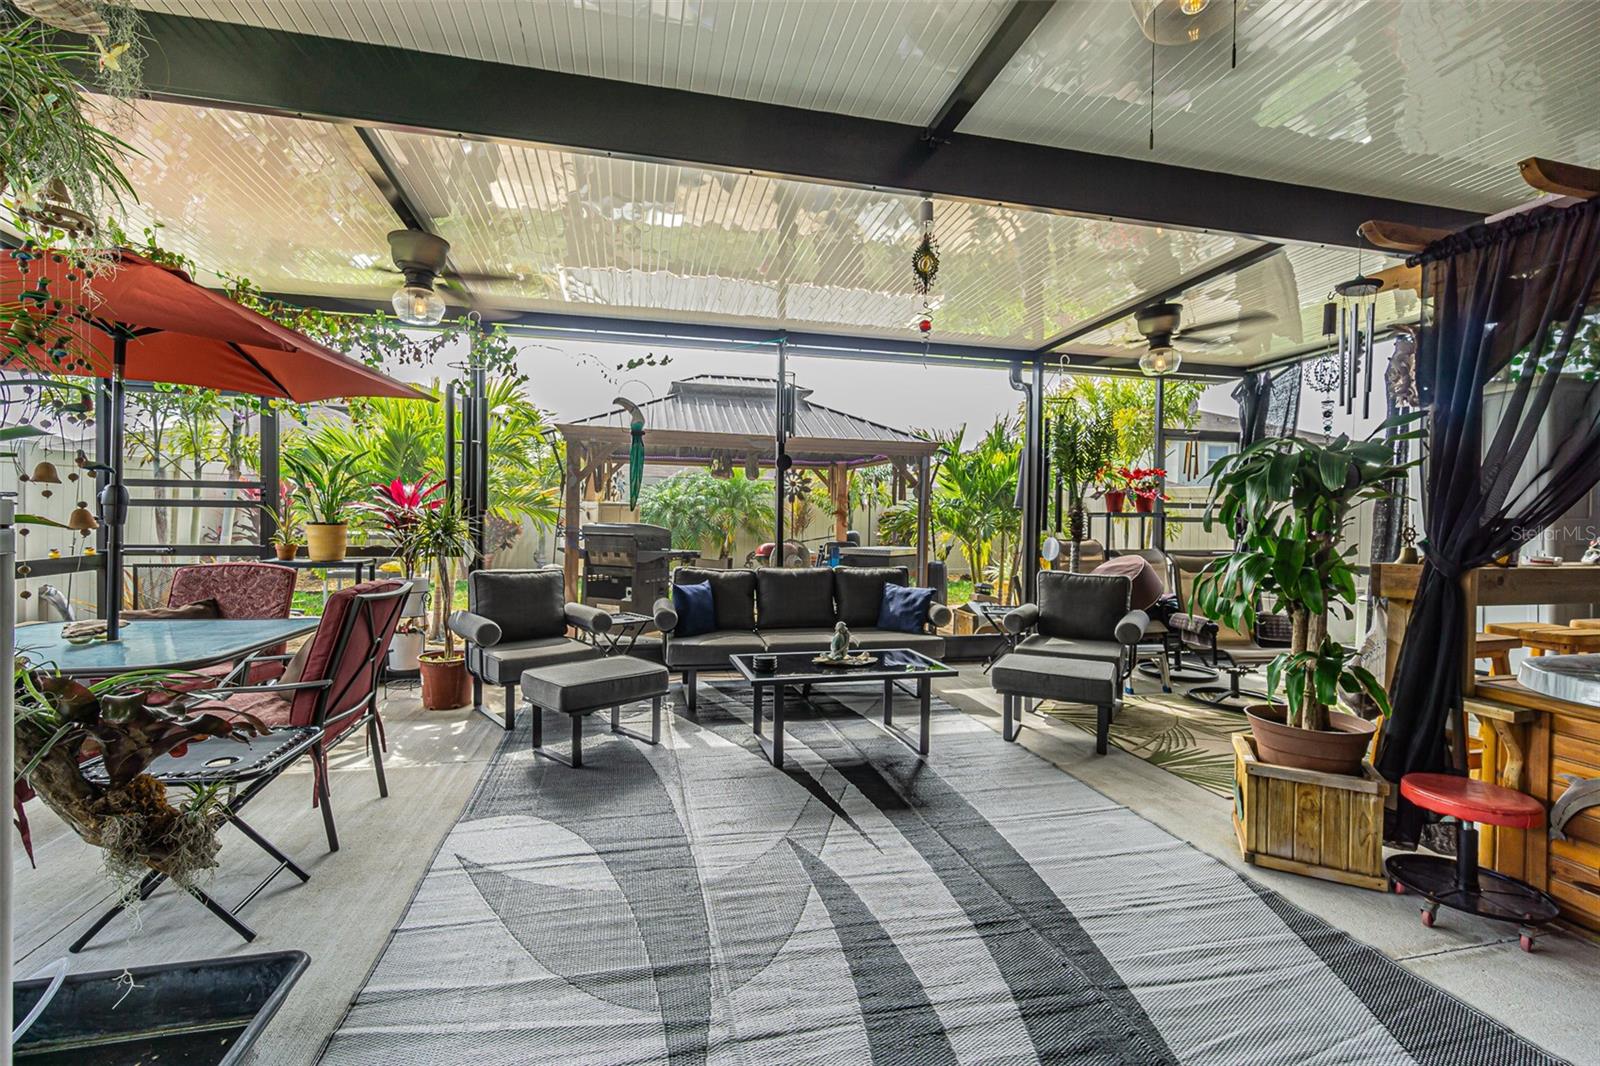 Huge lanai with tropical landscaping feels like the coziest vacation spot!